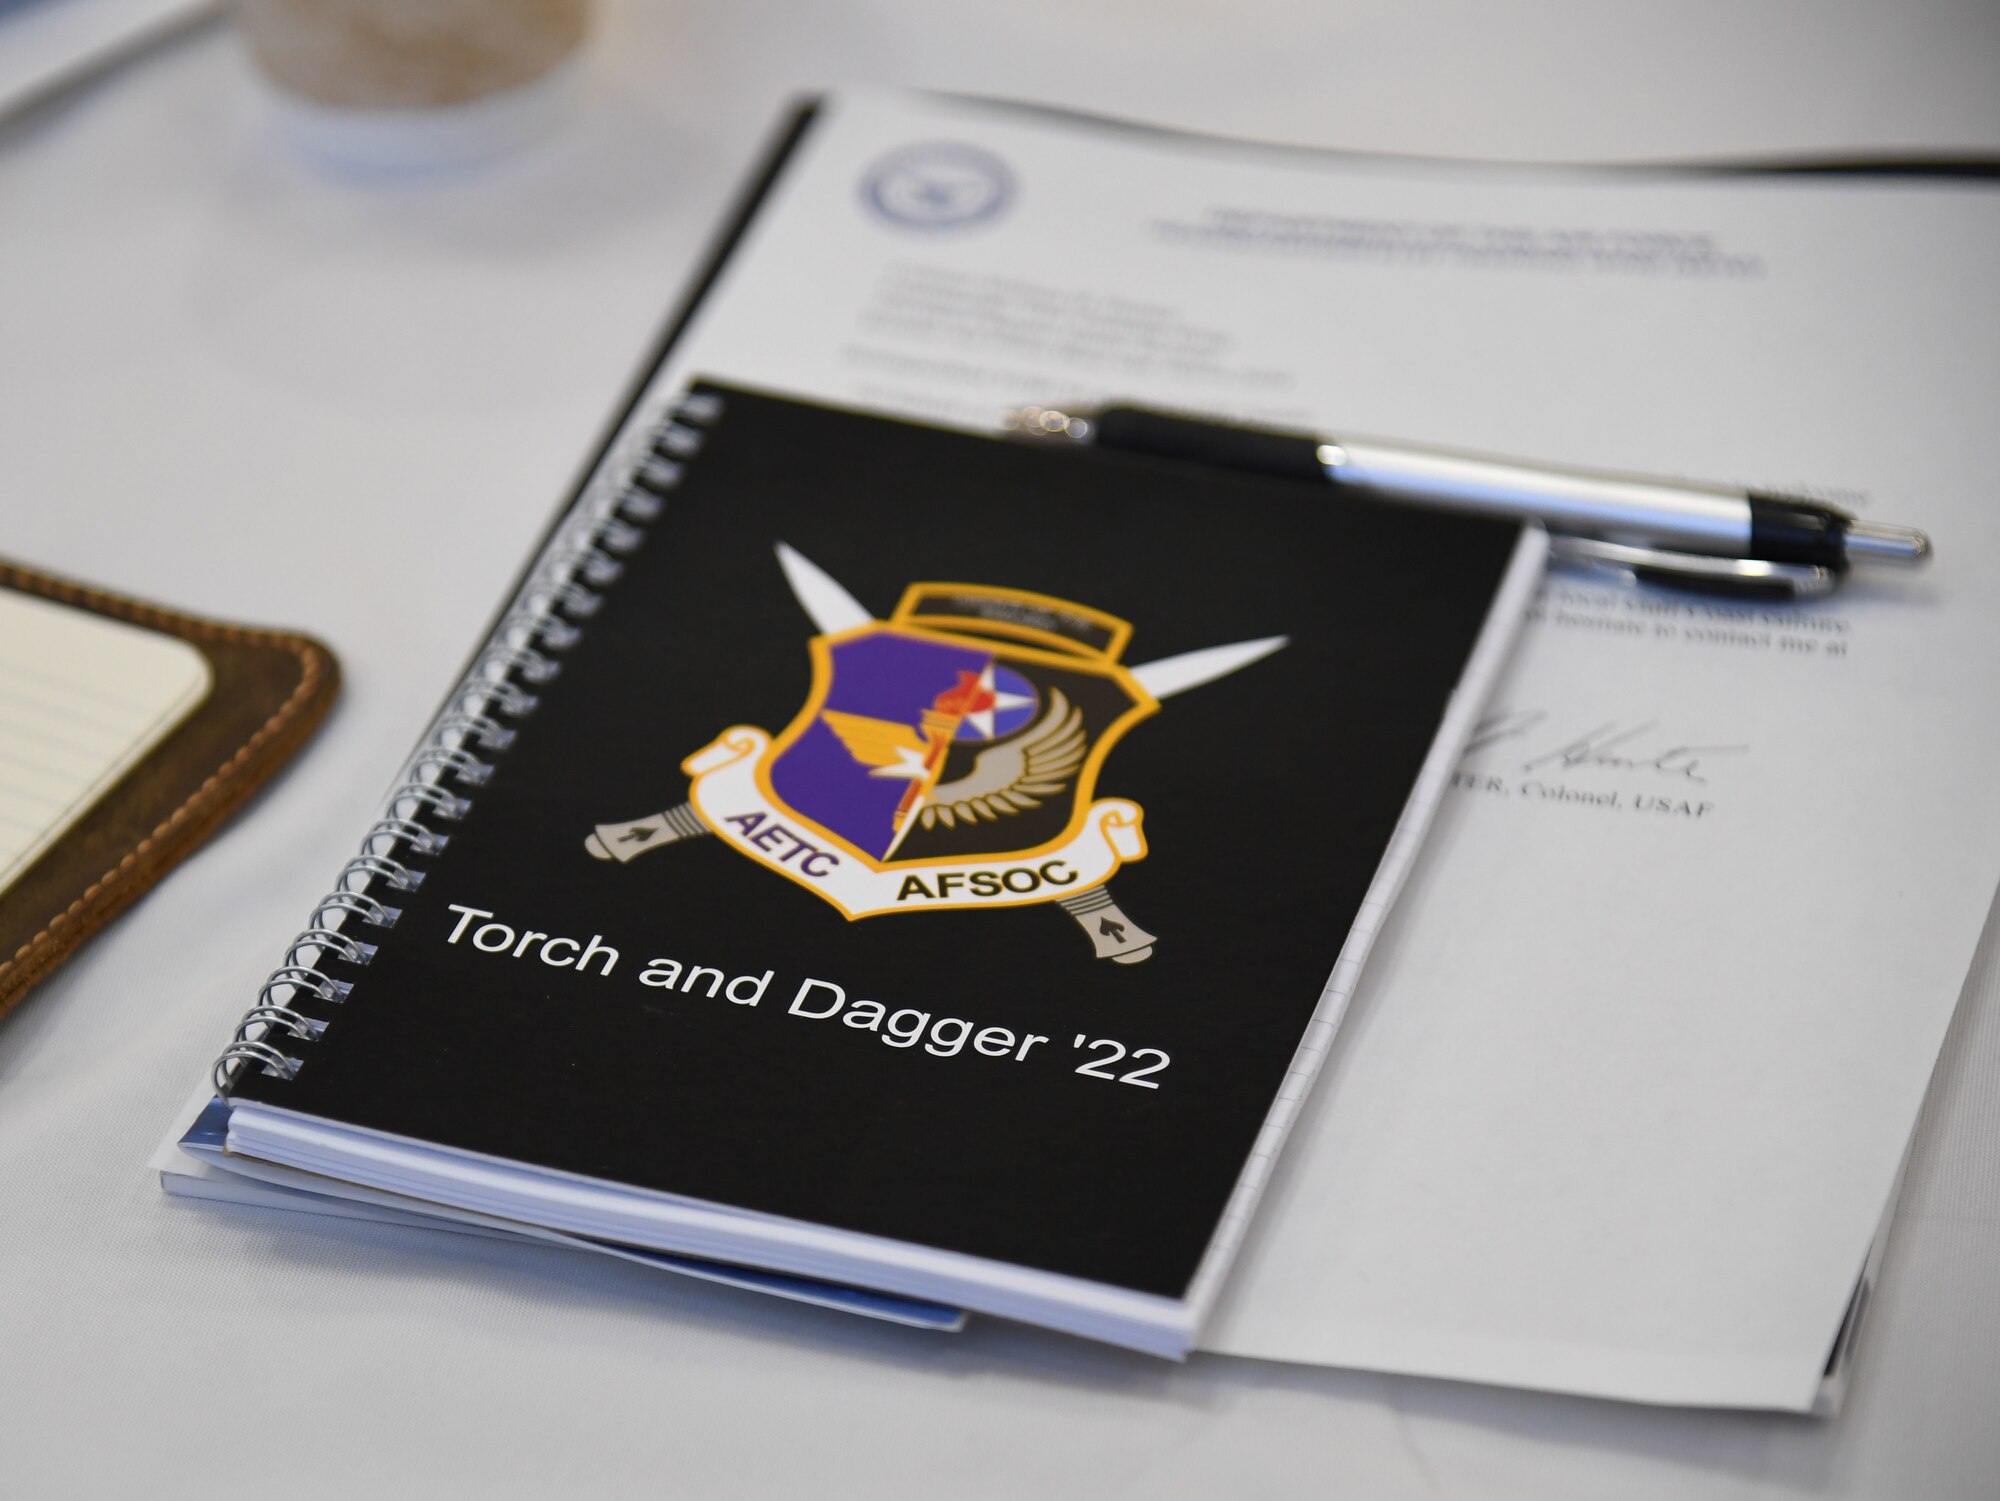 A booklet is on display during the inaugural Torch and Dagger professional development seminar at Keesler Air Force Base, Mississippi, October 13, 2022.